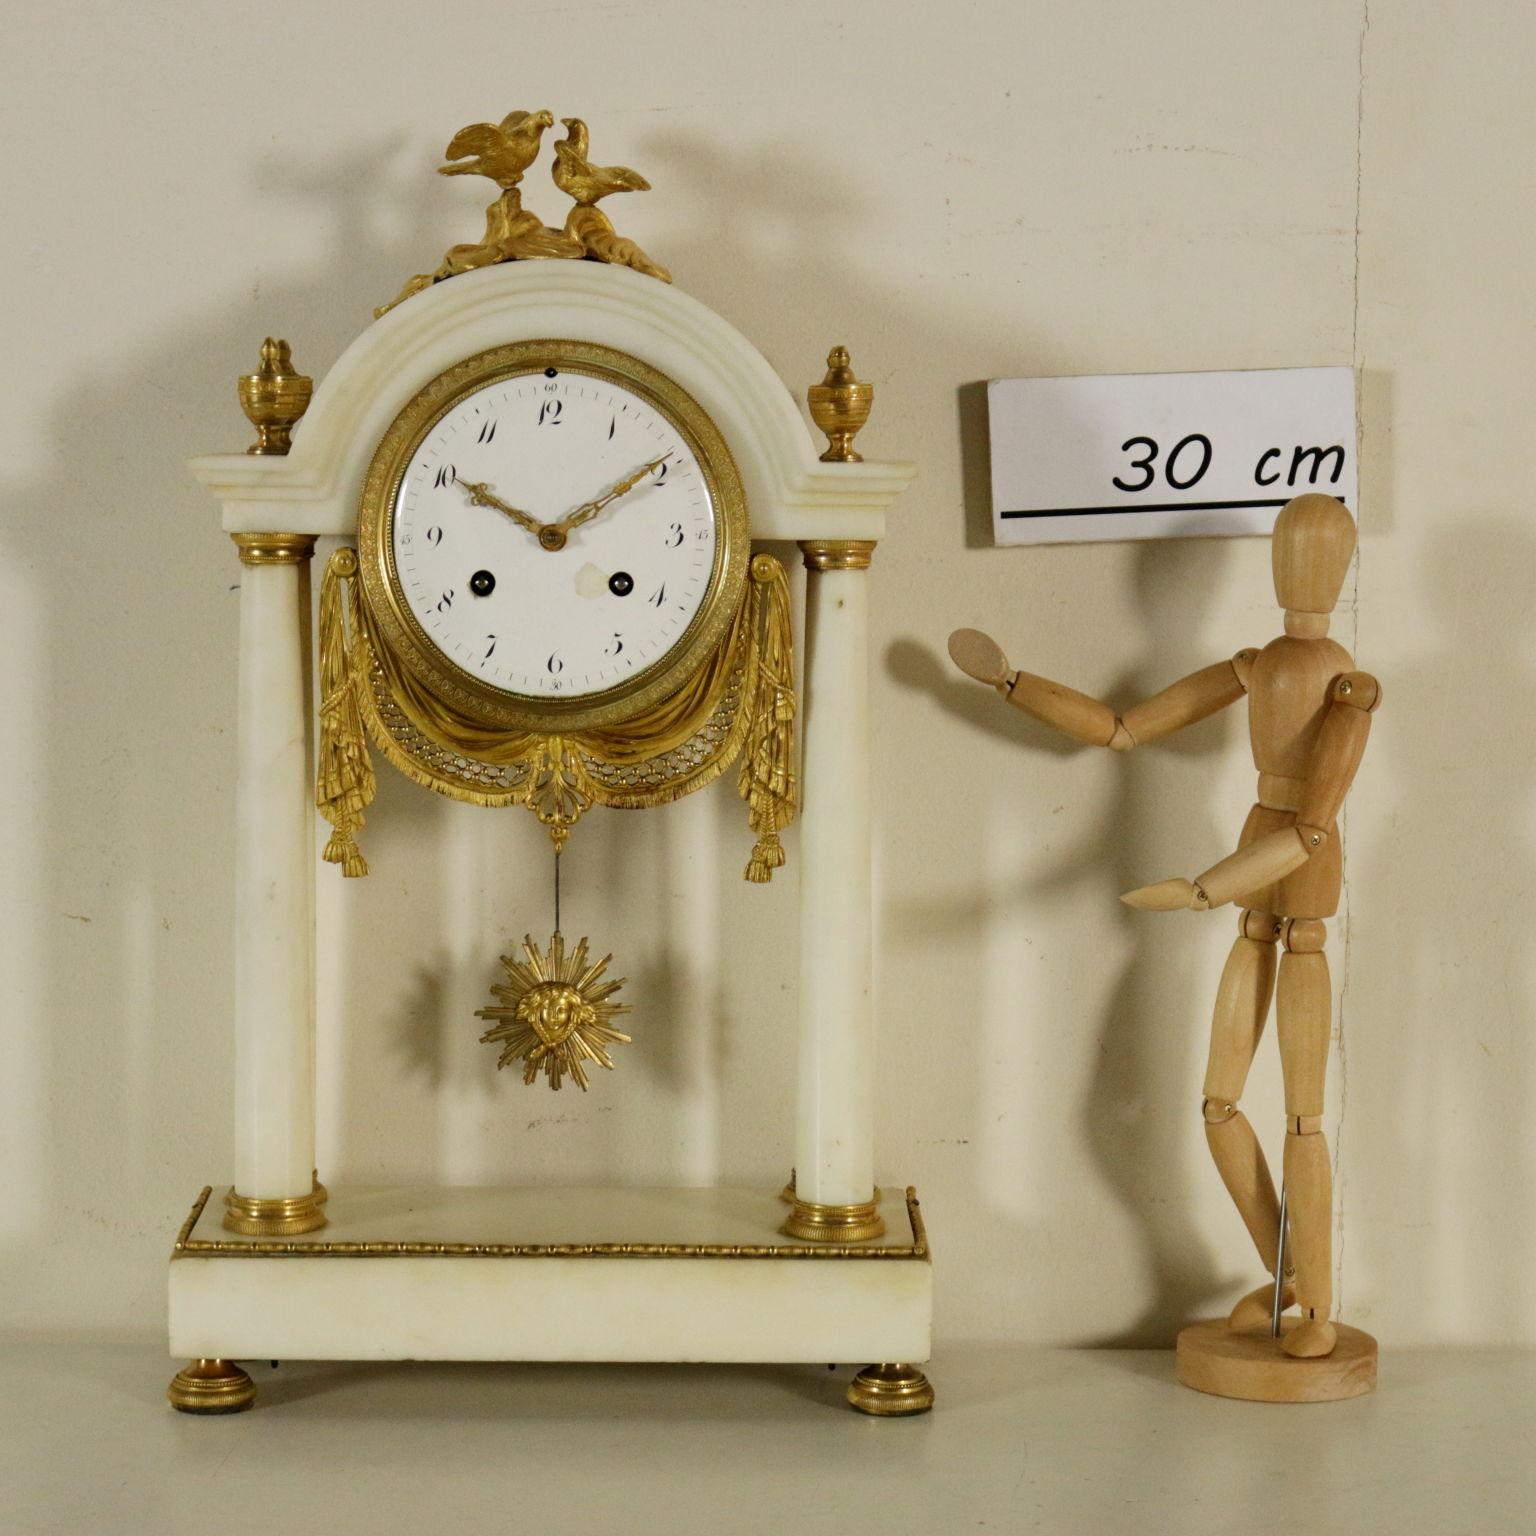 A table clock, white marble and gilded bronze, bulin treated. Glazed metal face with Arabian numbers enclosed in a bronze part and decorated with a large drape. The clock hands are made of finely perforated metal. A pair of doves on the top on sea